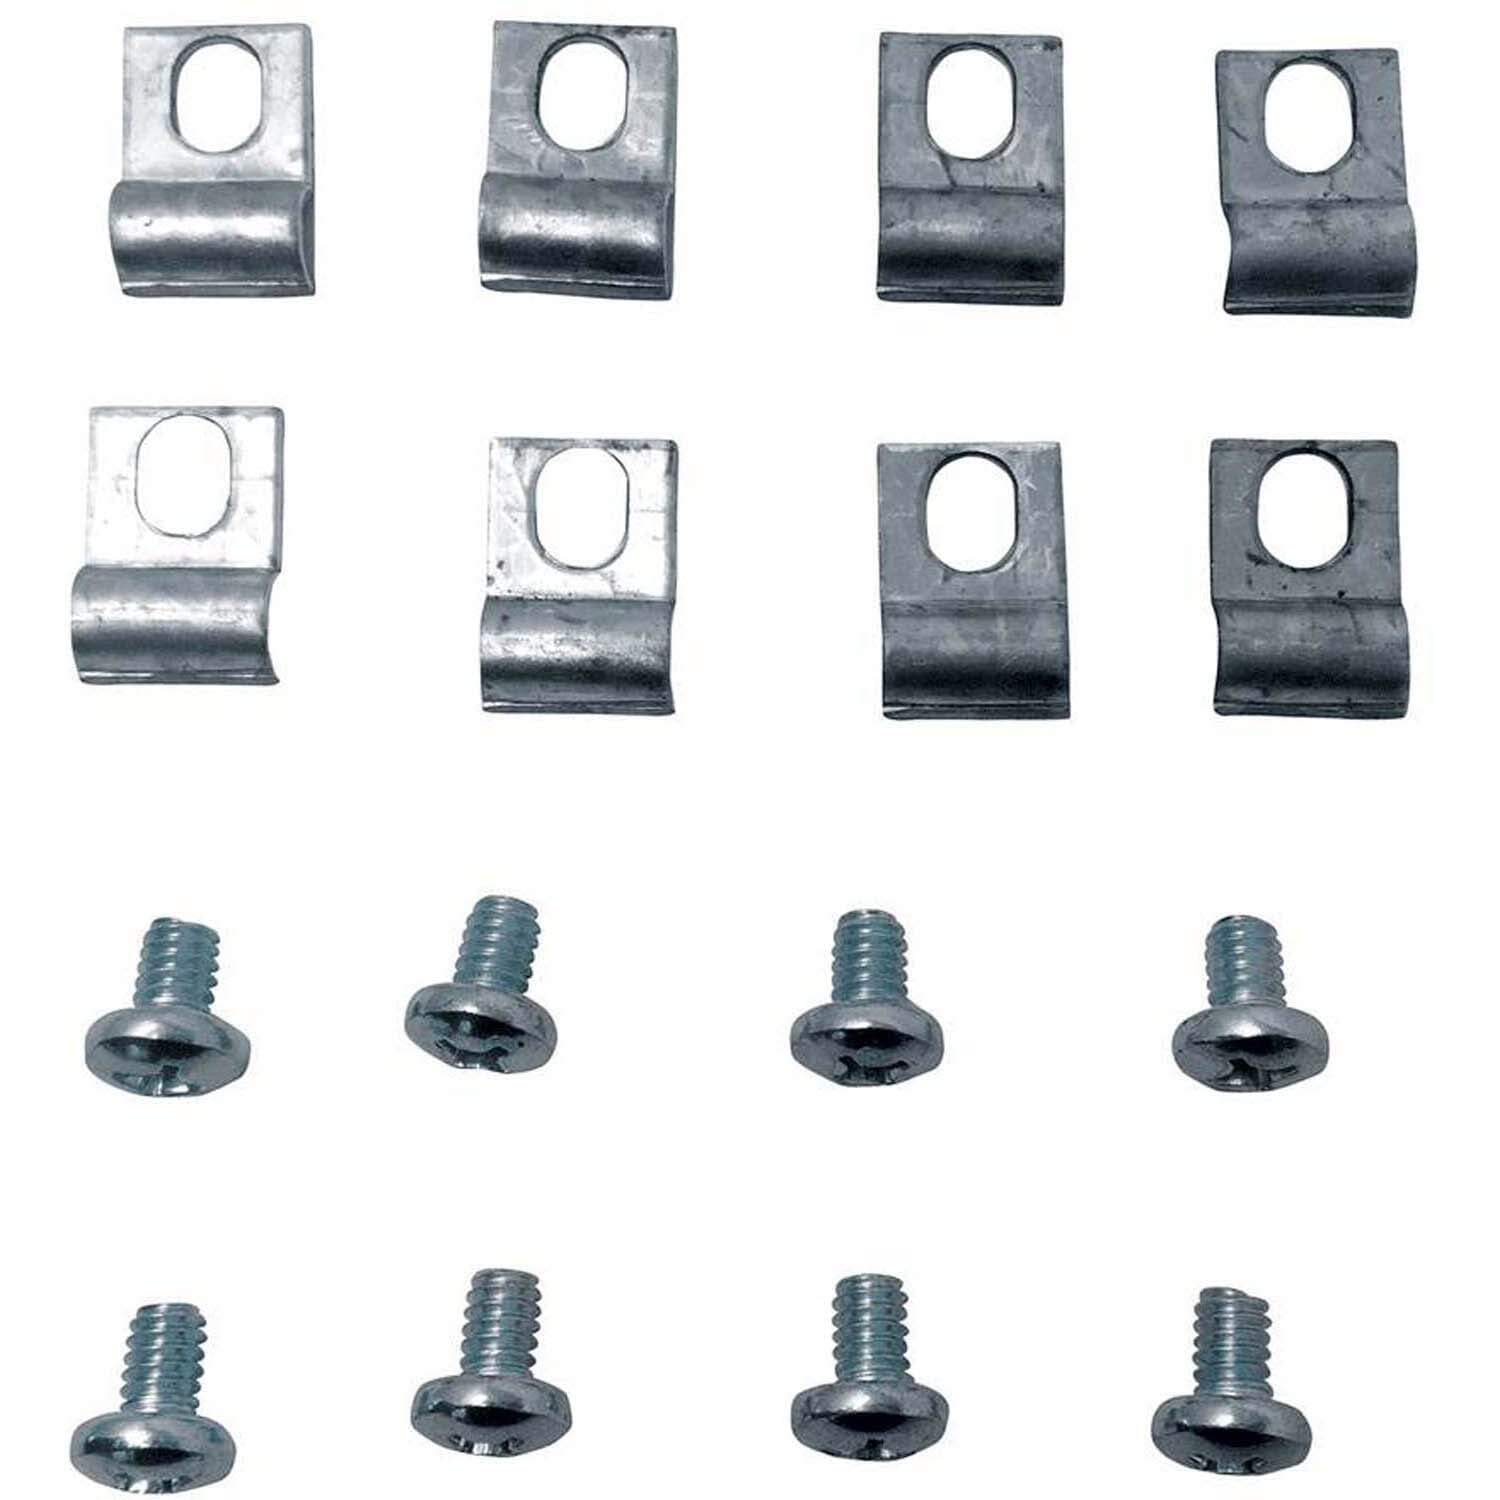 Replacement Retainer clip / screws 8 per pack fits Contemp/traditional  Door, GR47/48/57/58/77/78 FS BVENT, C33/1/2/3 FS BV, Z2510/2500/RO  Warmhearth Plus R90 PR67 H300846-920